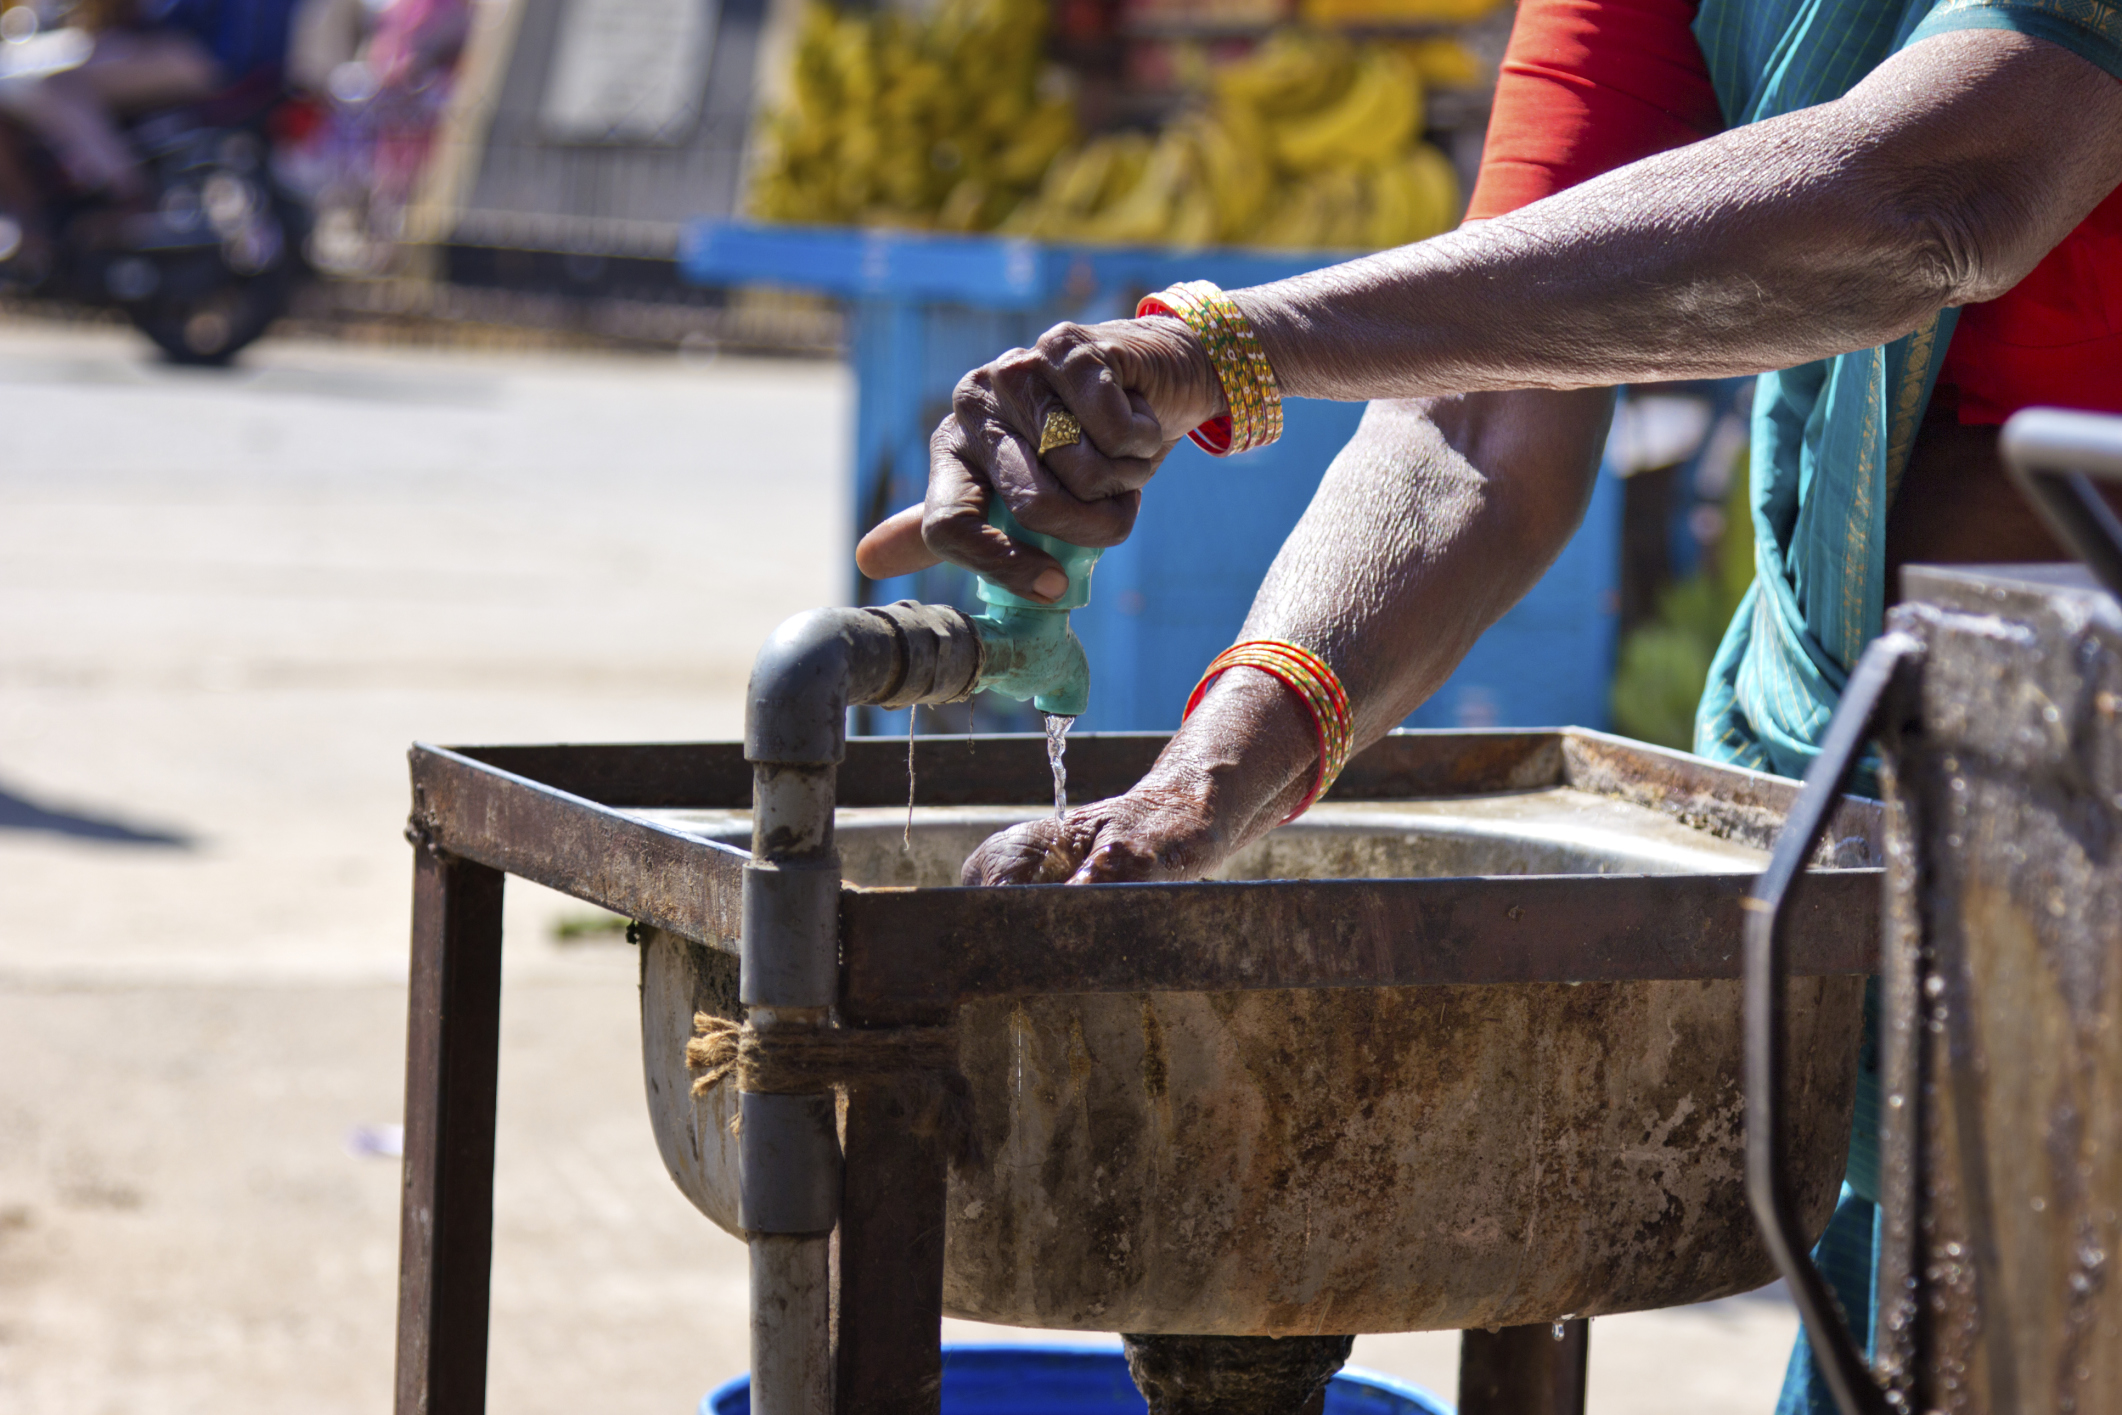 Person getting water from an outdoor sink in India